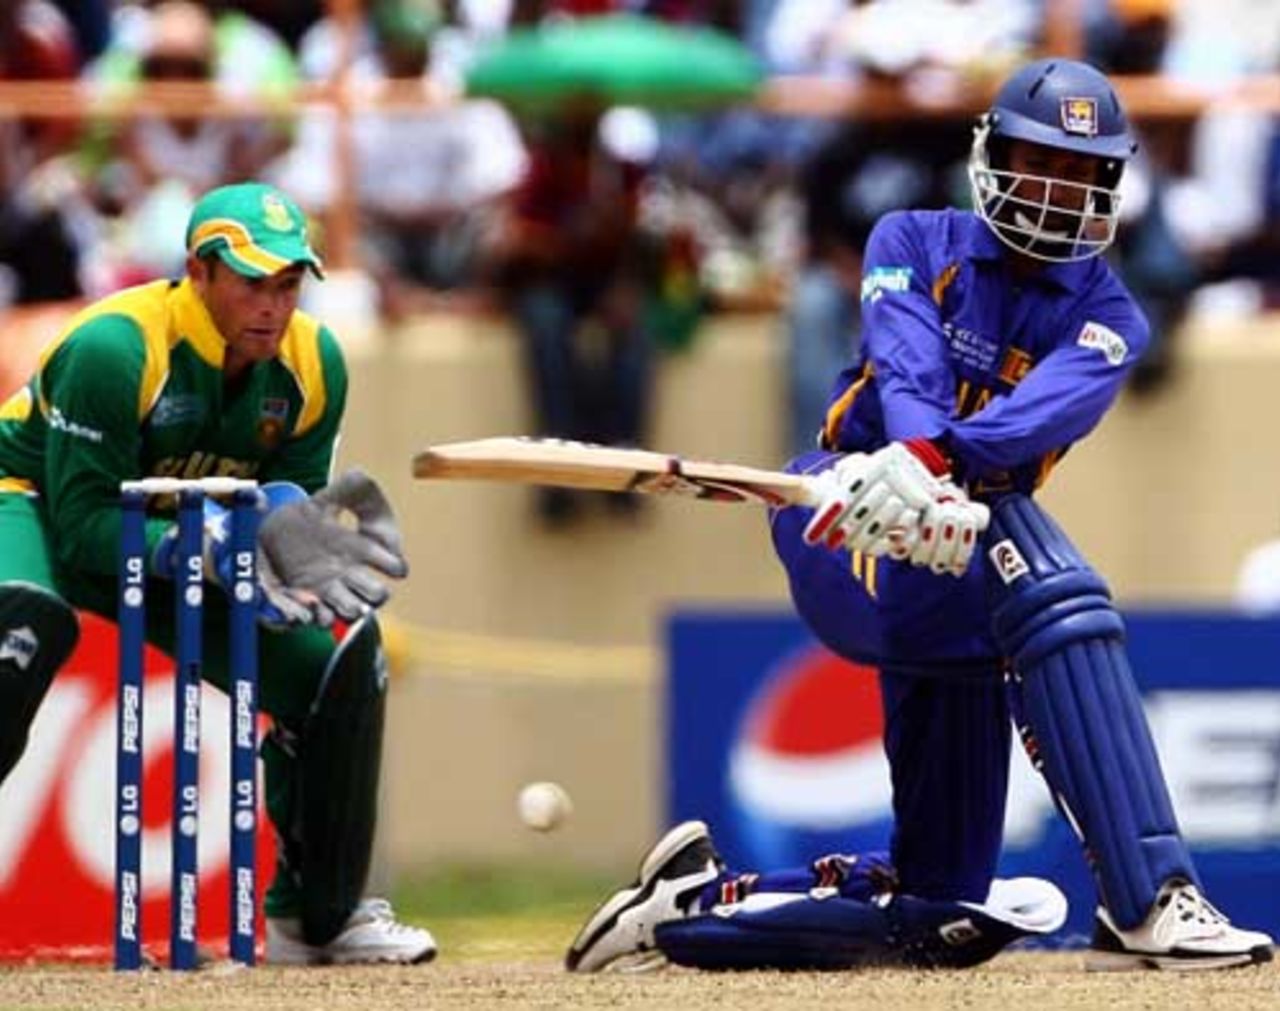 Russel Arnold sweeps durng his fifty, South Africa v Sri Lanka, Super Eights, Guyana, March 28, 2007